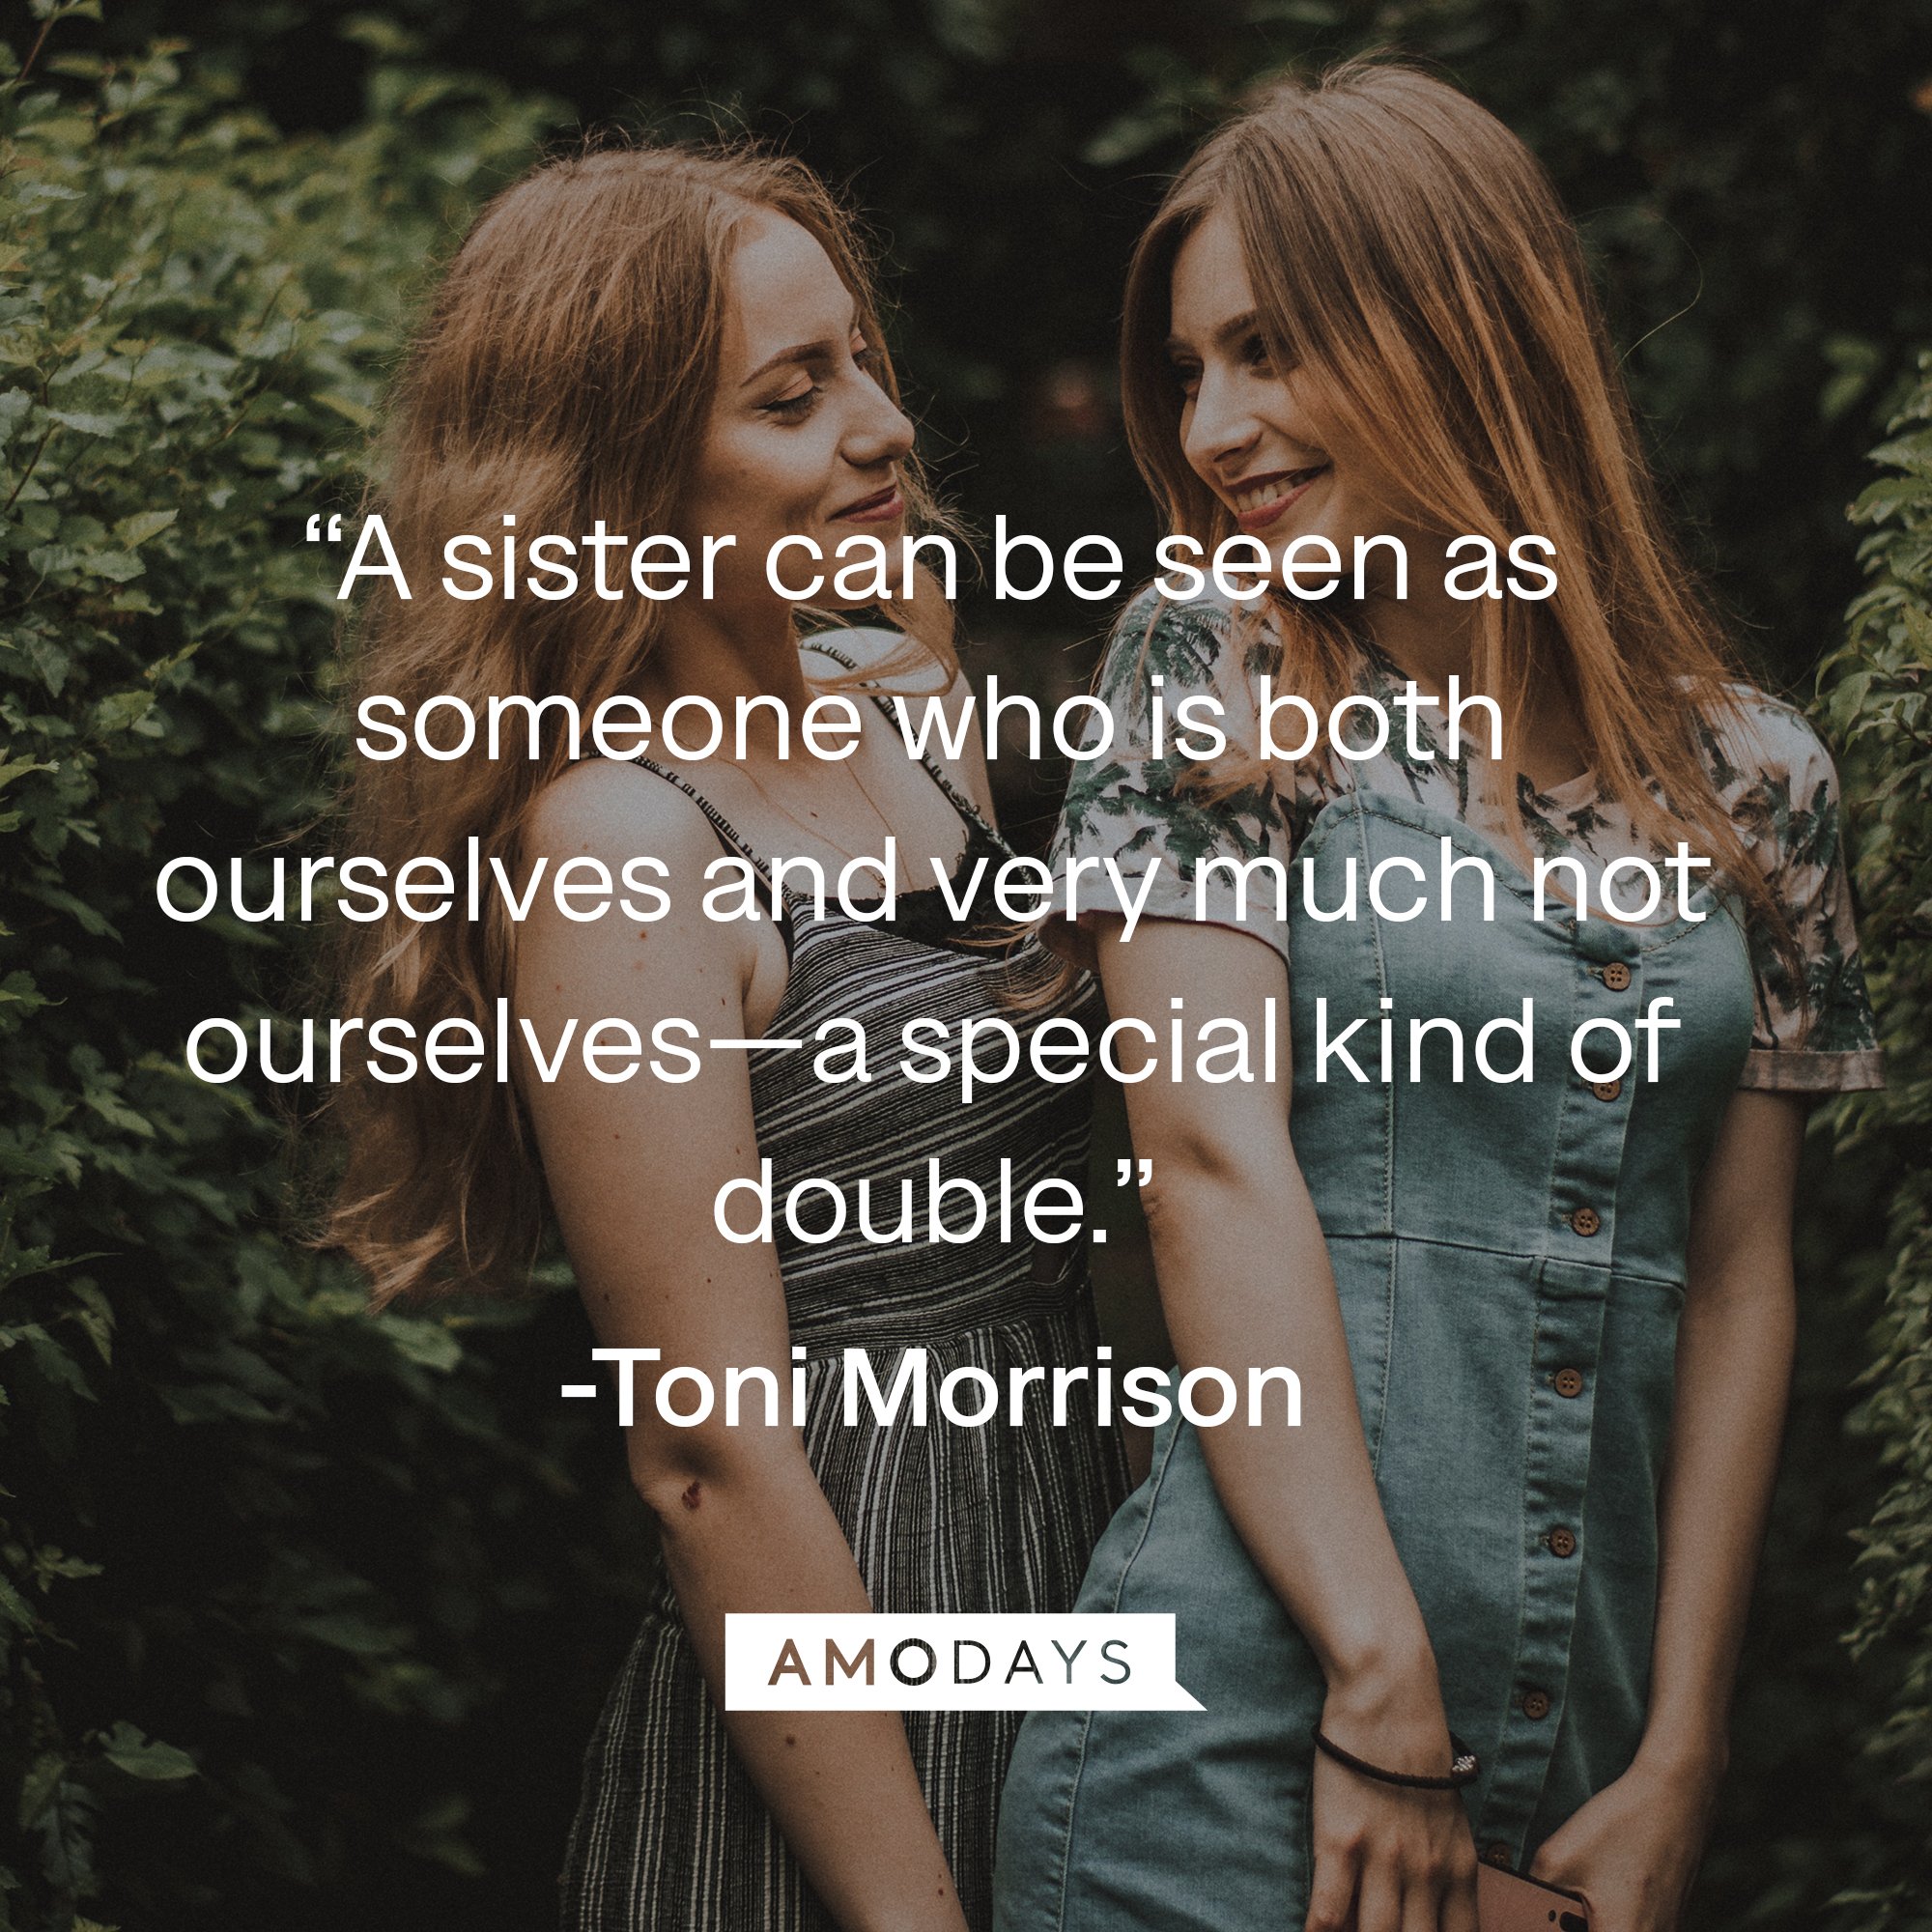 Toni Morrison's quote: “A sister can be seen as someone who is both ourselves and very much not ourselves—a special kind of double.” | Image: AmoDays